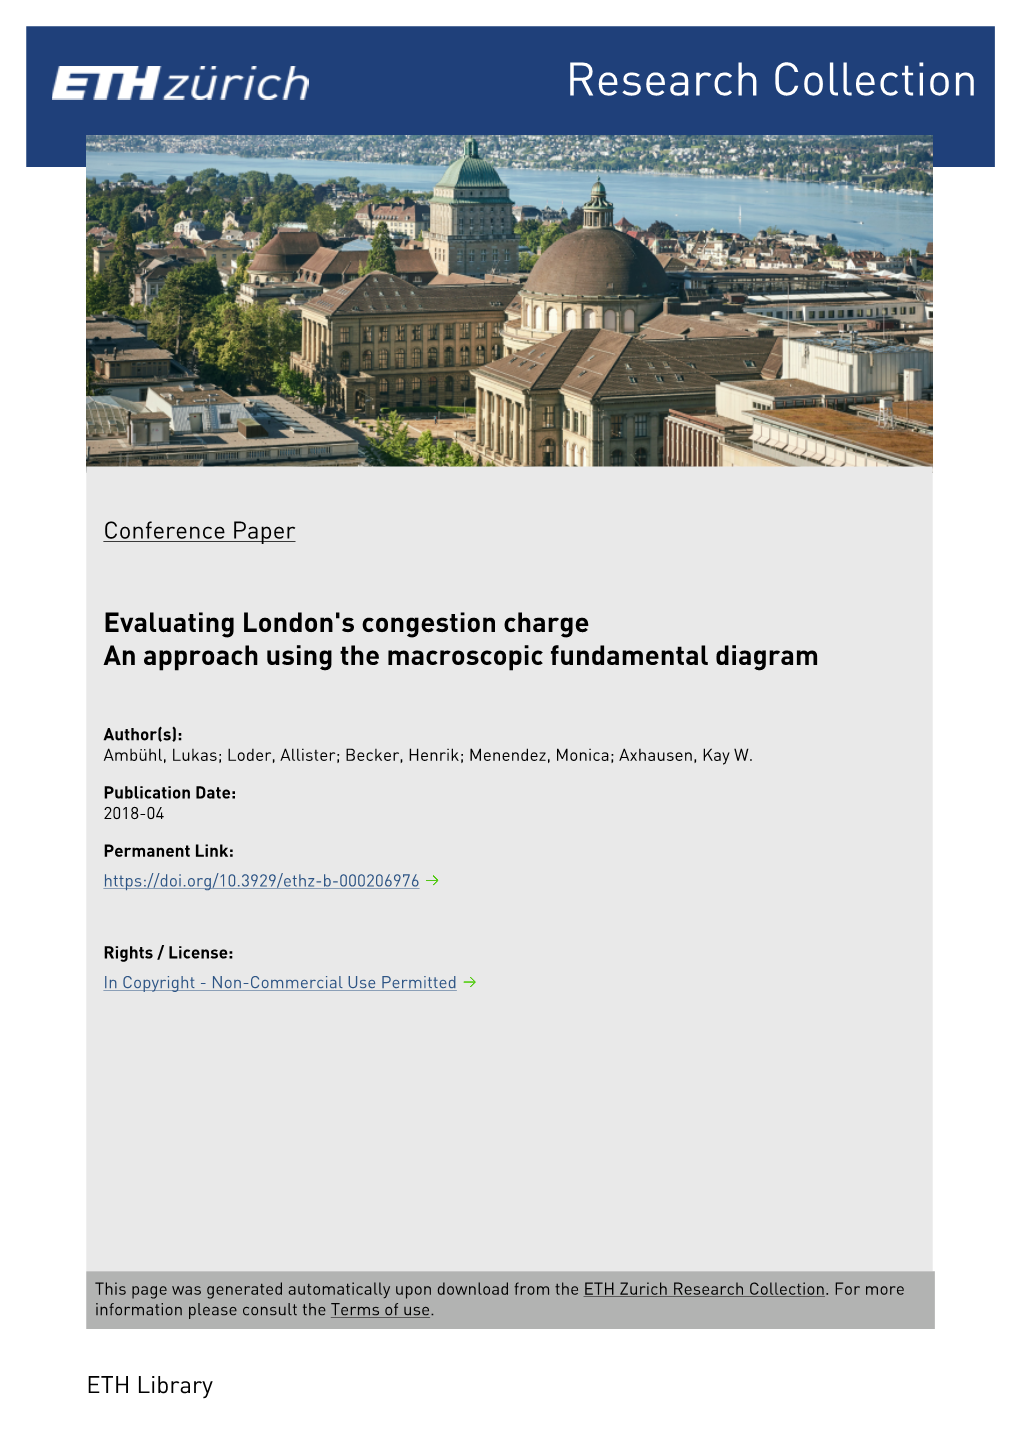 Evaluating London's Congestion Charge an Approach Using the Macroscopic Fundamental Diagram